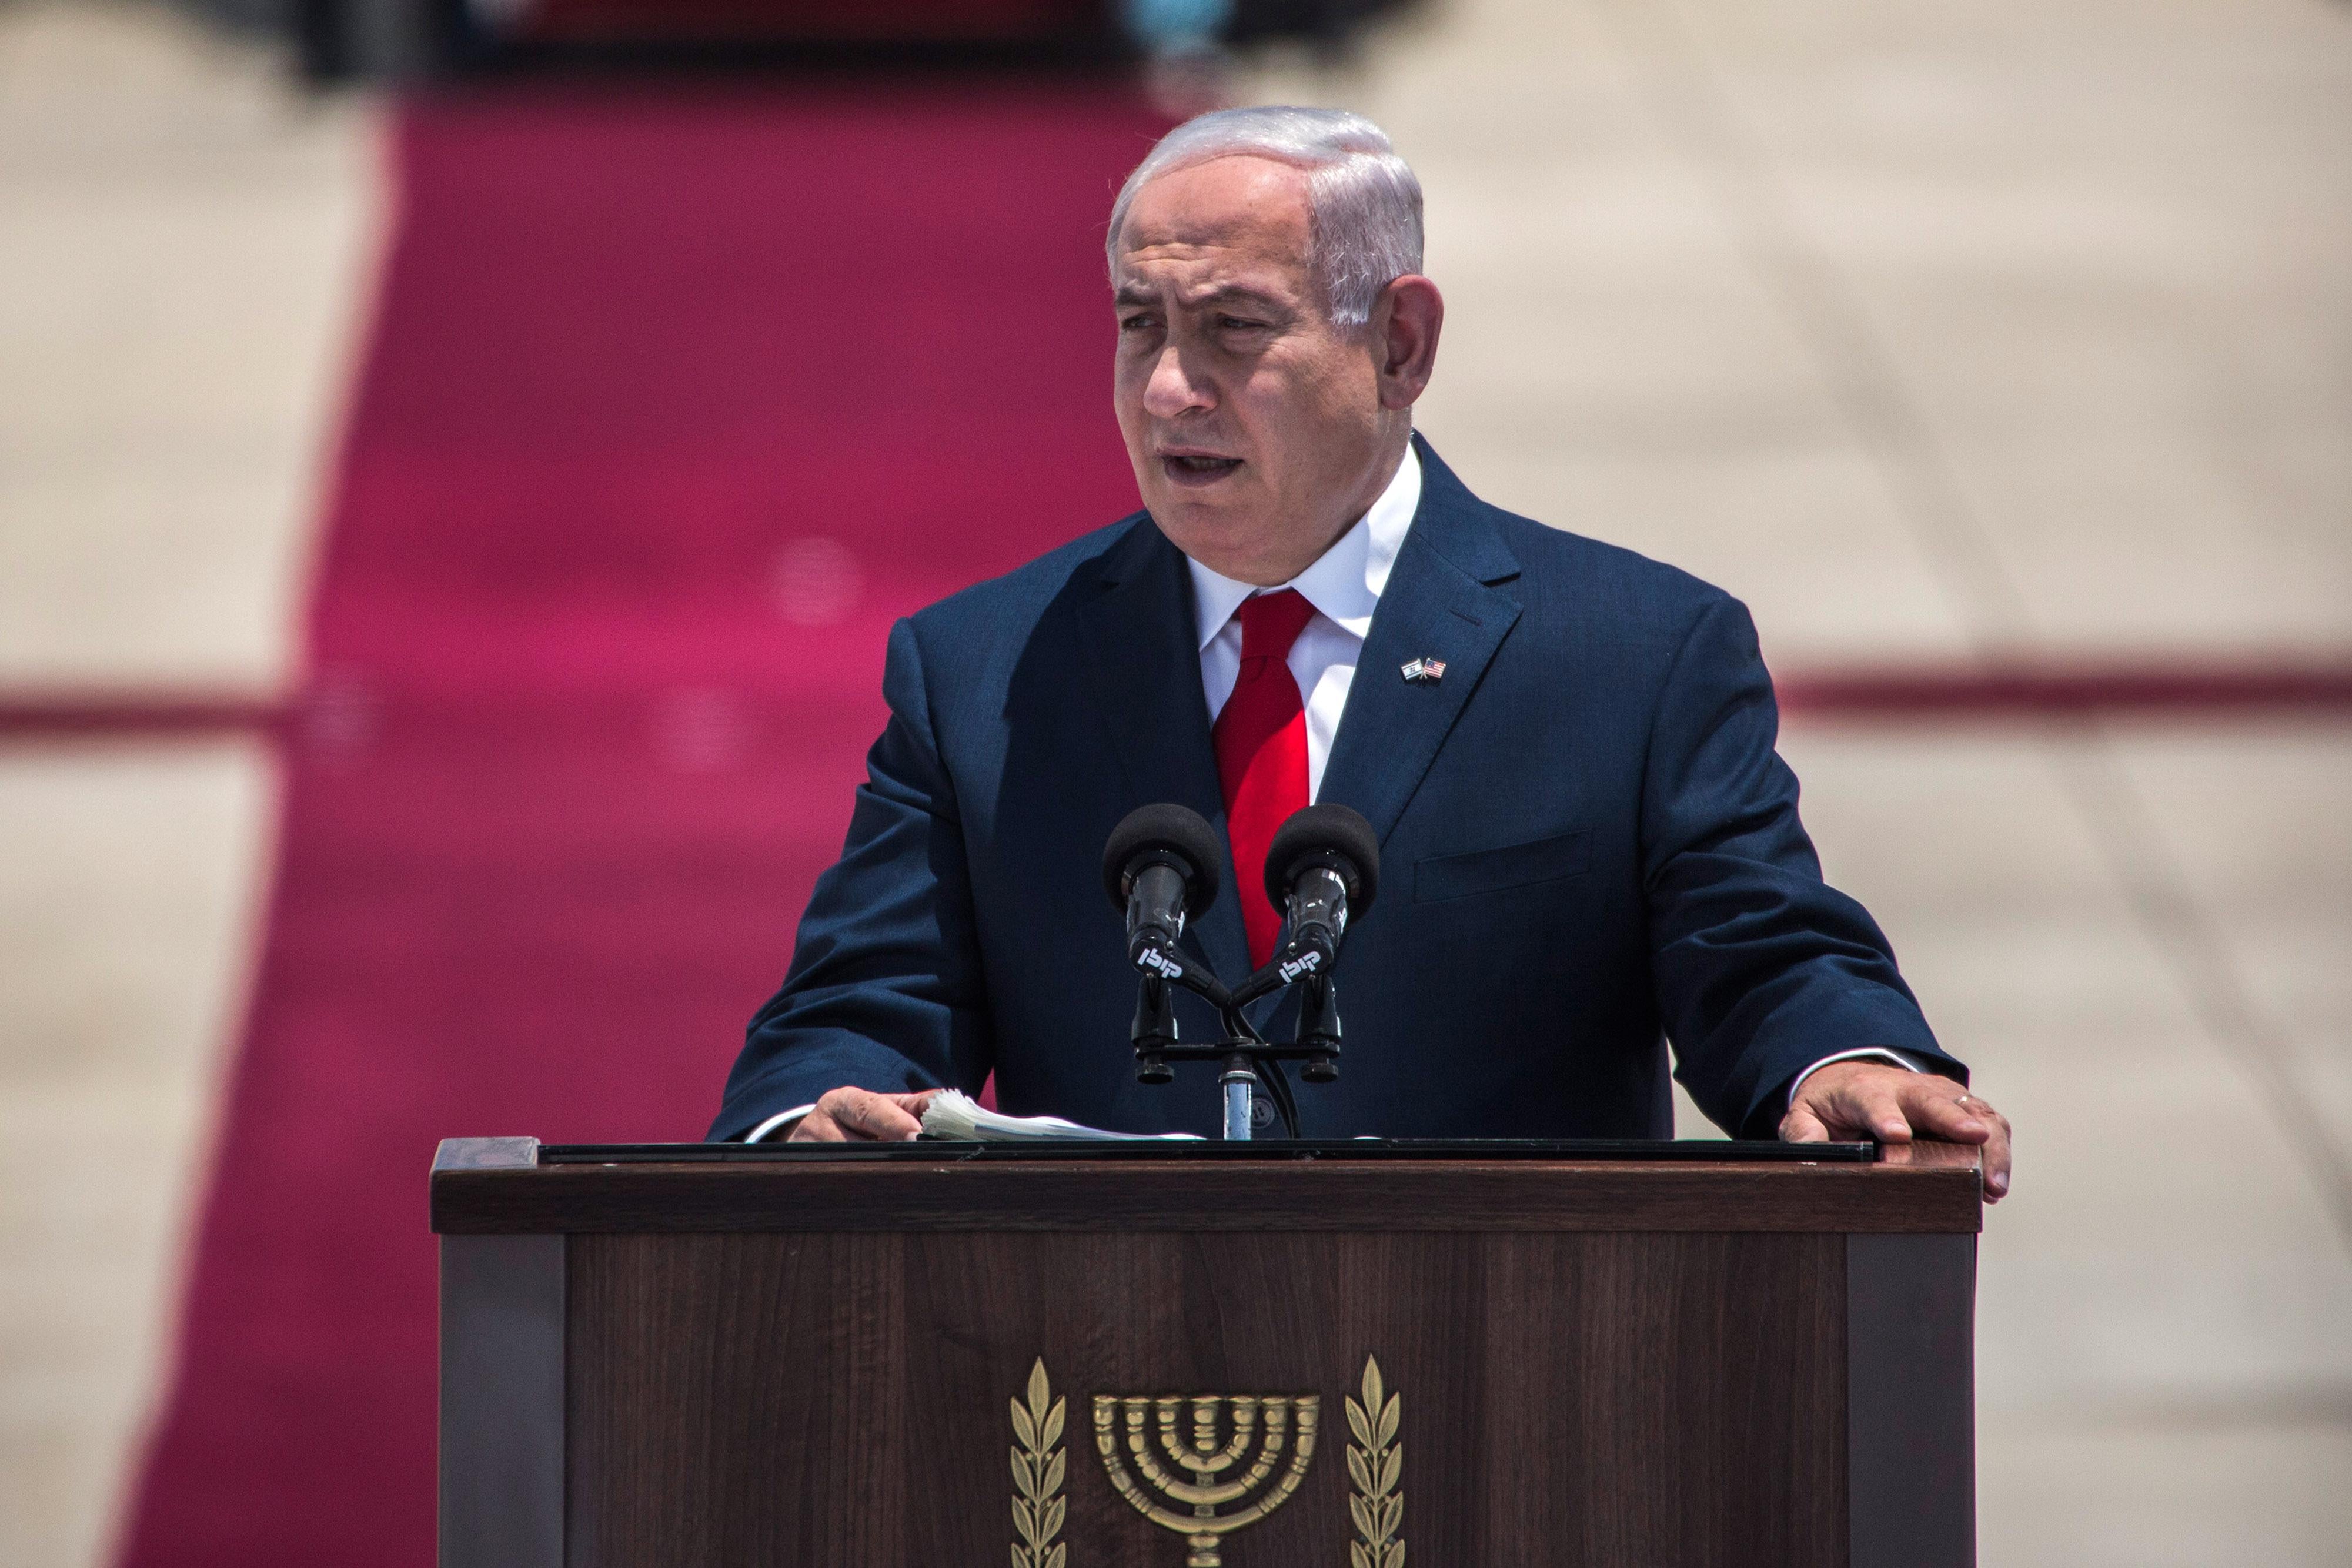 TEL AVIV, ISRAEL - MAY 22:   Israeli Prime Minister Benjamin Netanyahu gives a welcoming speach during an official welcoming ceremony on US Presidents Trump arrival at Ben Gurion International Airport on May 22, 2017 near Tel Aviv, Israel. This will be Trump's first visit as President to the region, and his itinerary will include meetings with the Palestinian and Israeli leaders. (Photo by Ilia Yefimovich/Getty Images)